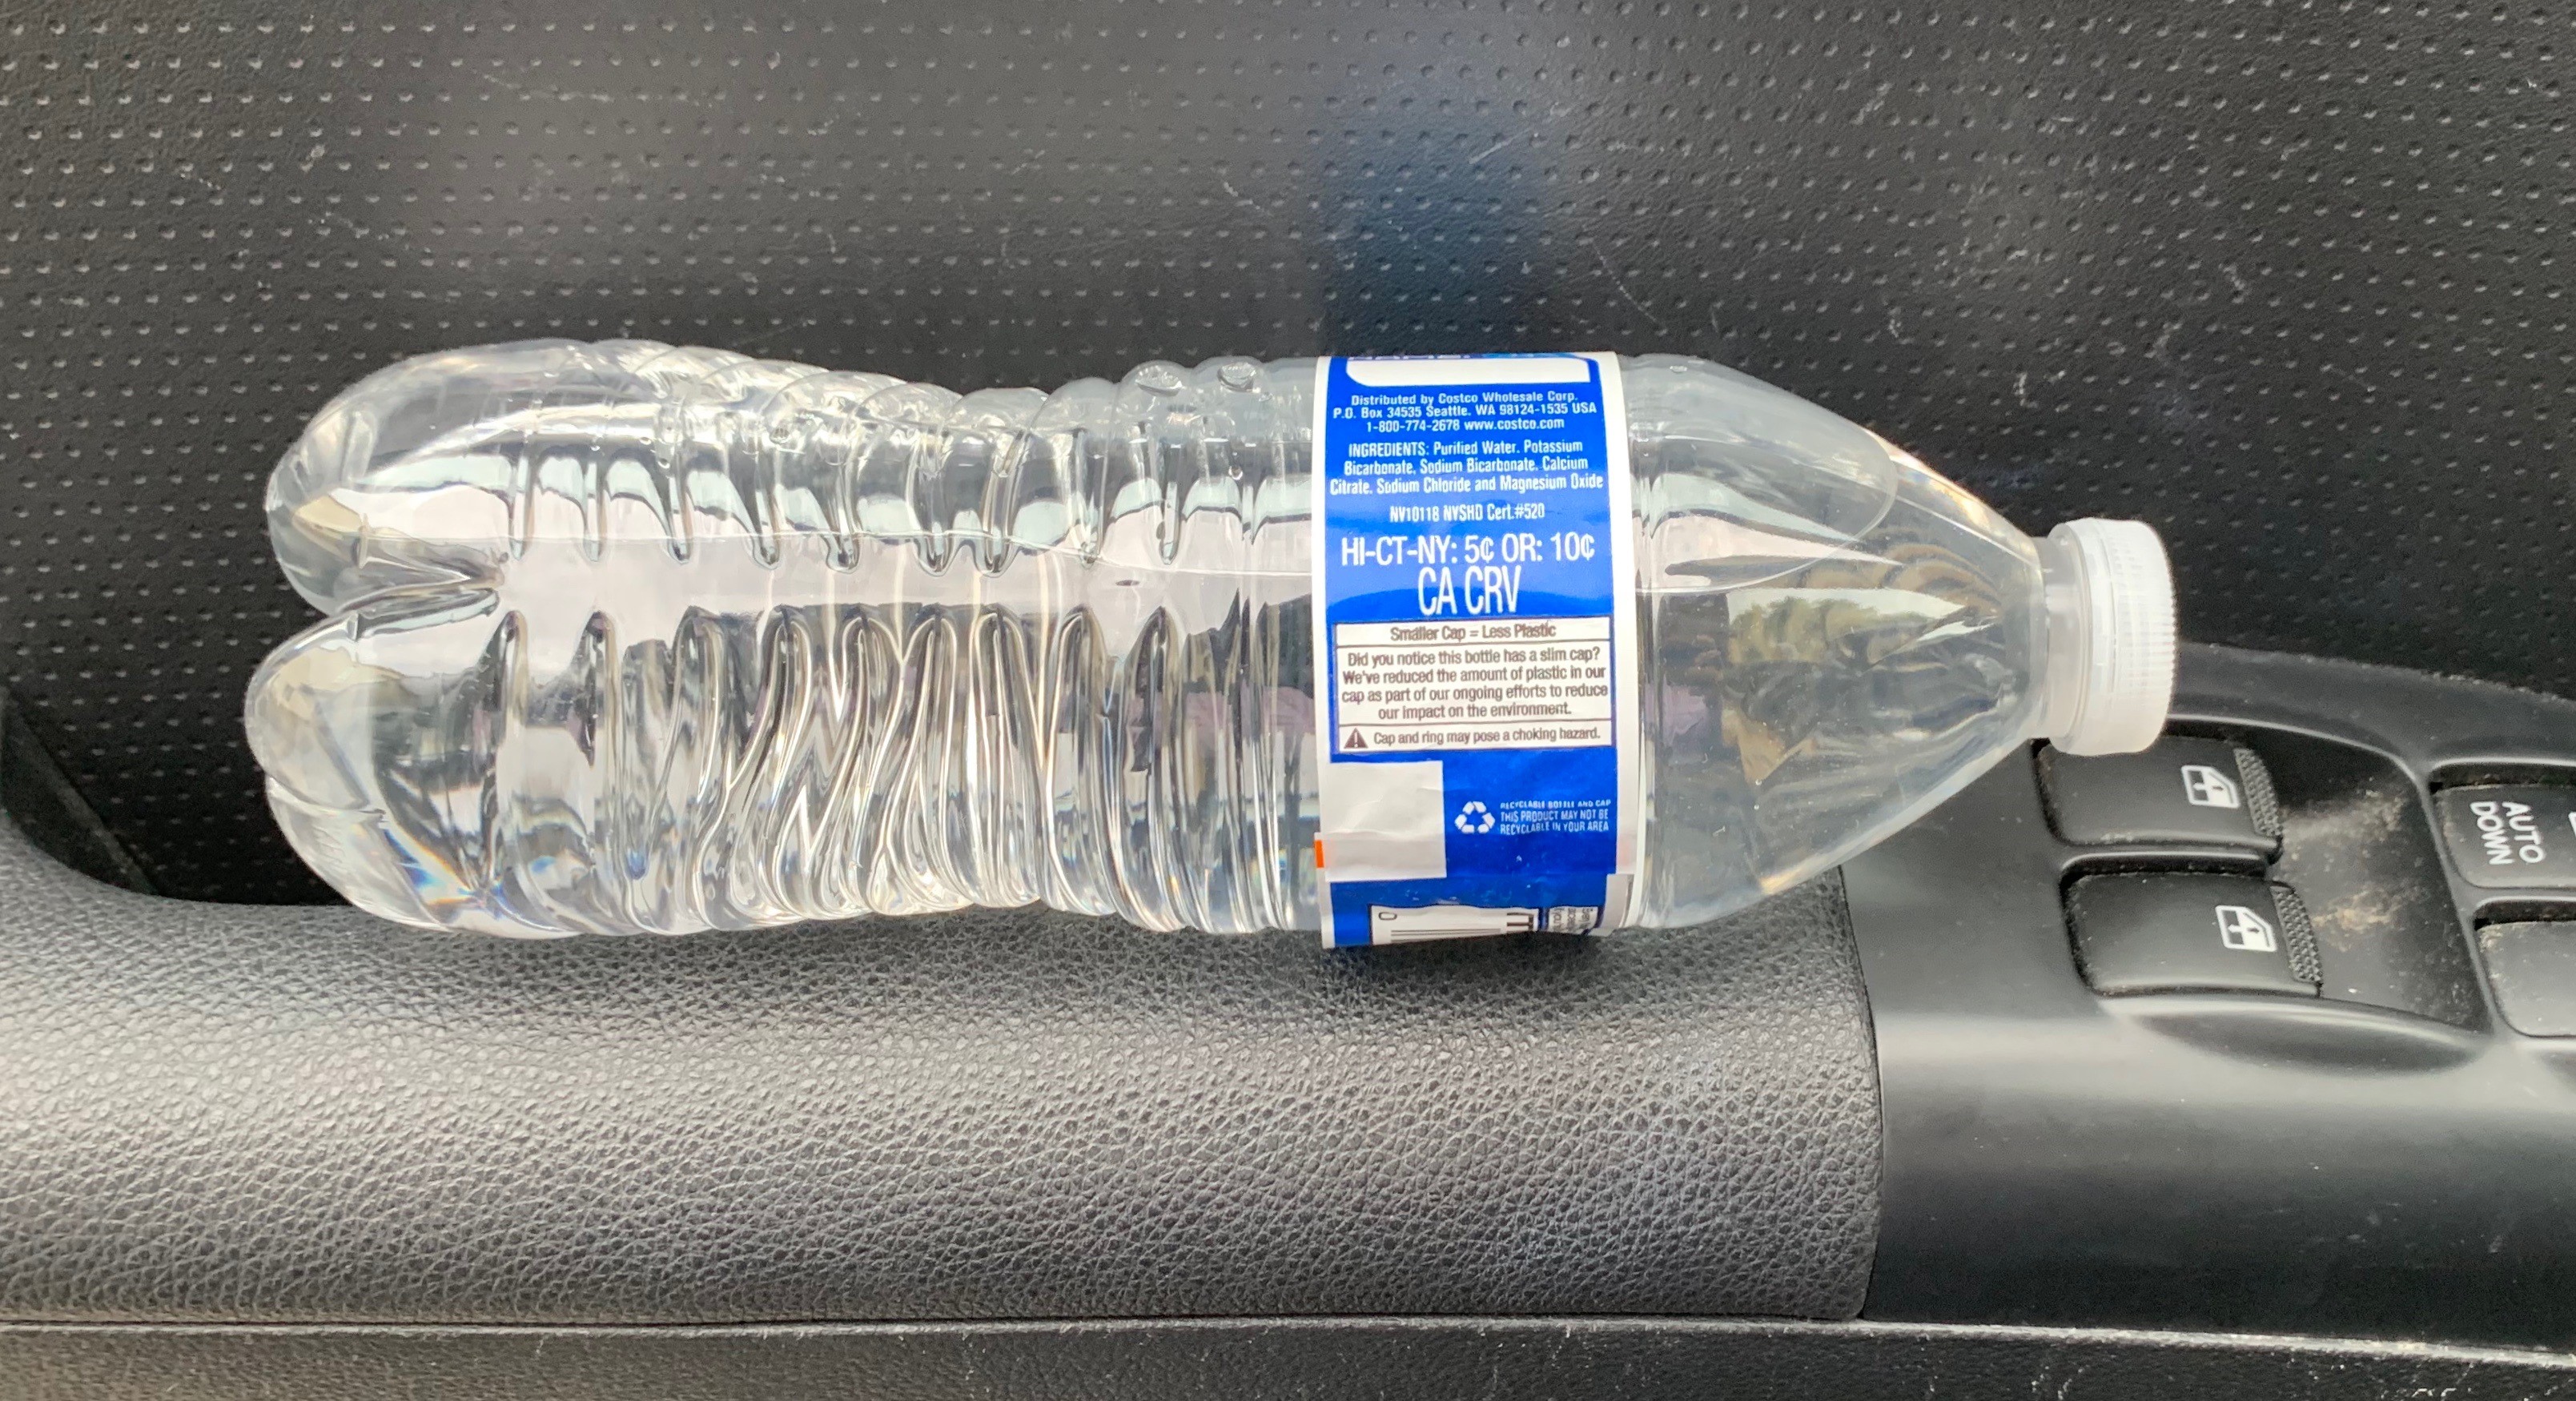 VERIFY: Is it safe to drink bottled water left in hot cars? - WINK